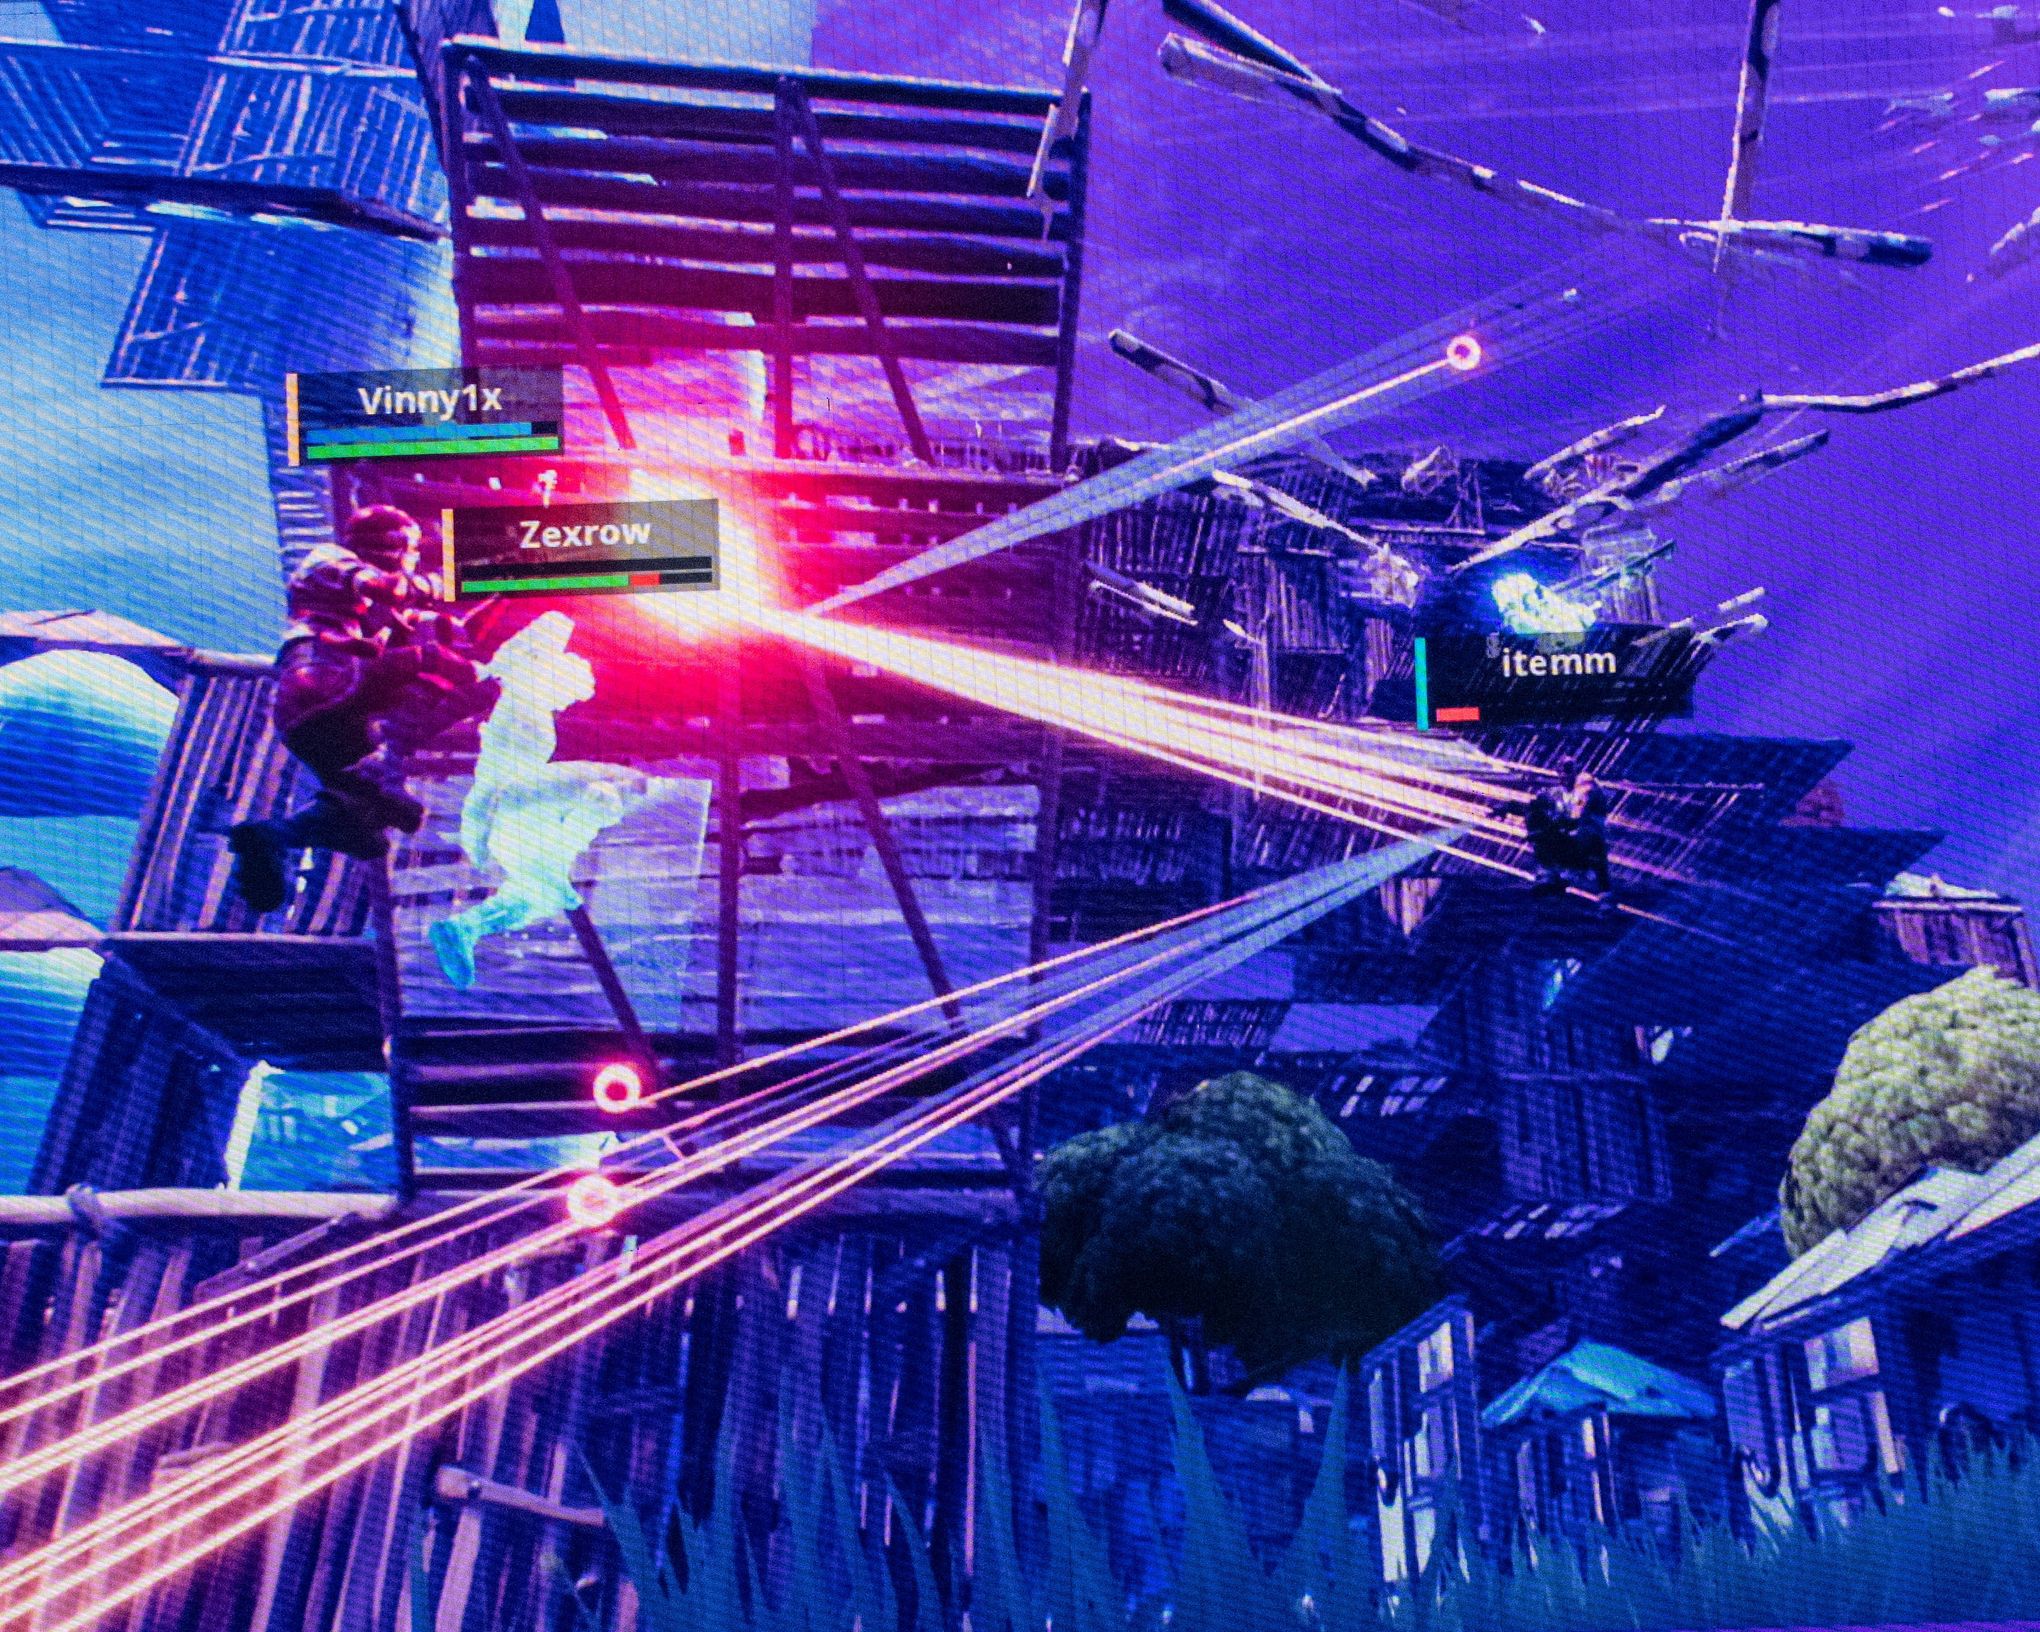 Fortnite Fans Are Strongly Requesting Epic Games to Keep the OG